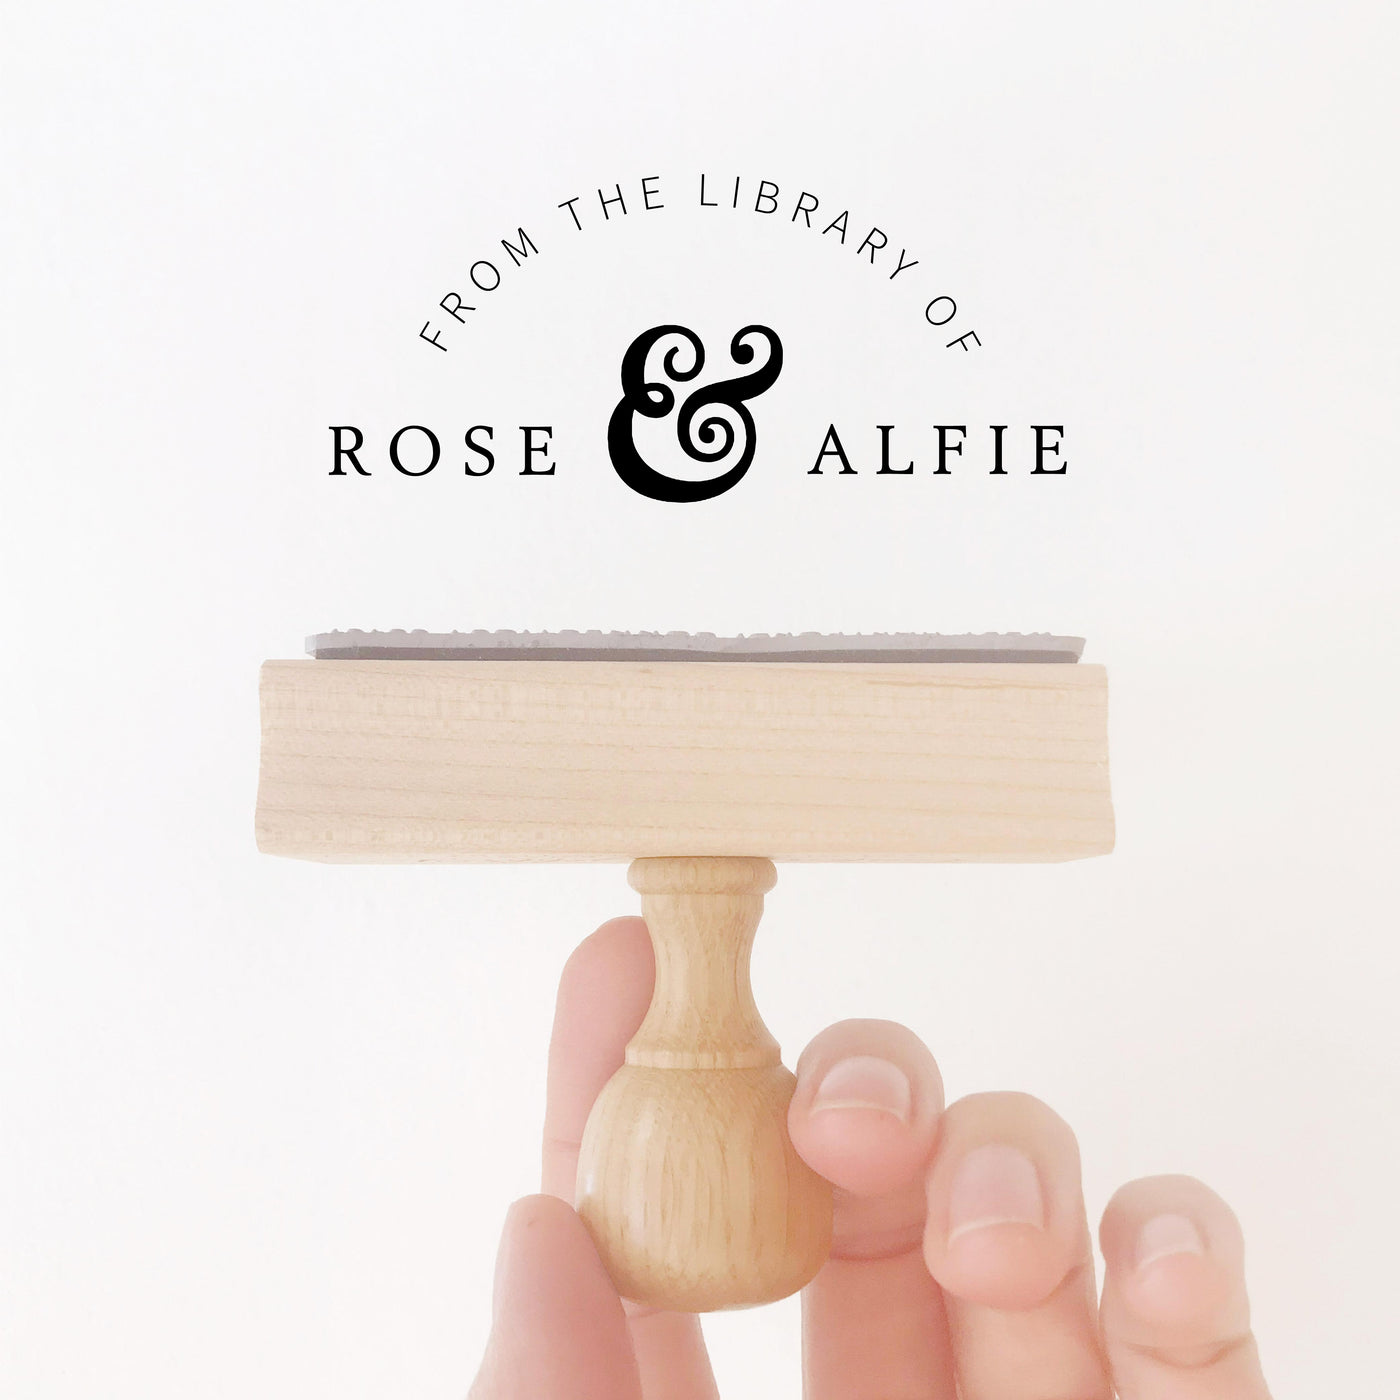 Georgina Classic Library Book Stamp | Custom Ex Libre Rubber Stamp with Wooden Handle for Wedding Couple & Family Gift, Luxe Packaging Embellishment | Heirloom Seals